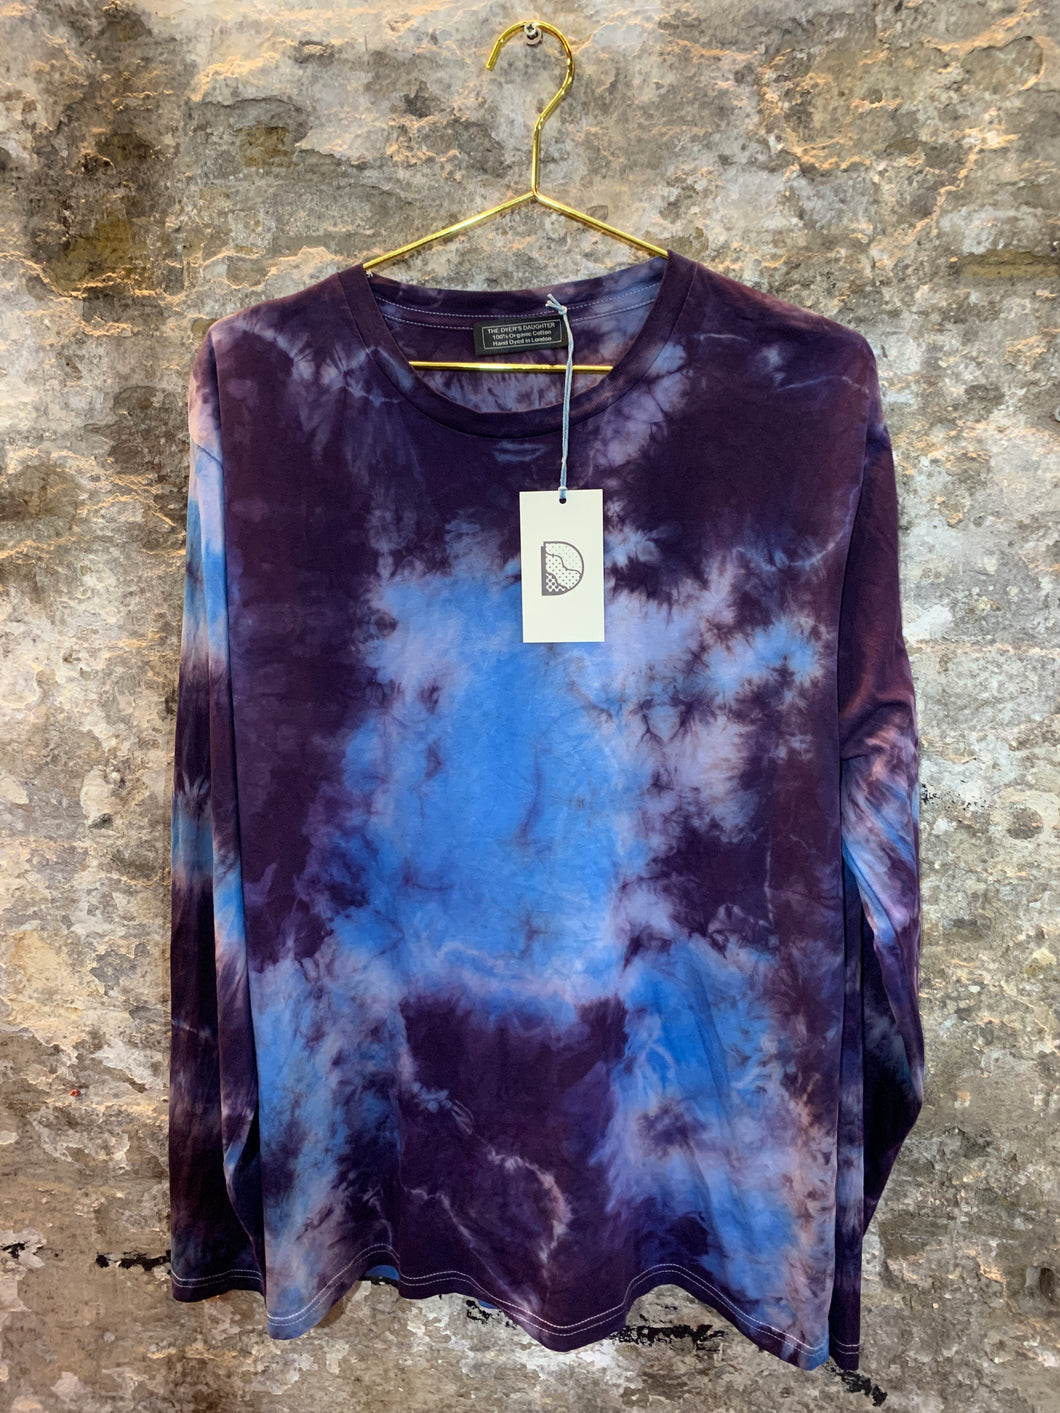 GLASTONBURY 100% Organic Cotton Light Weight Long sleeved Tie-Dyed Top